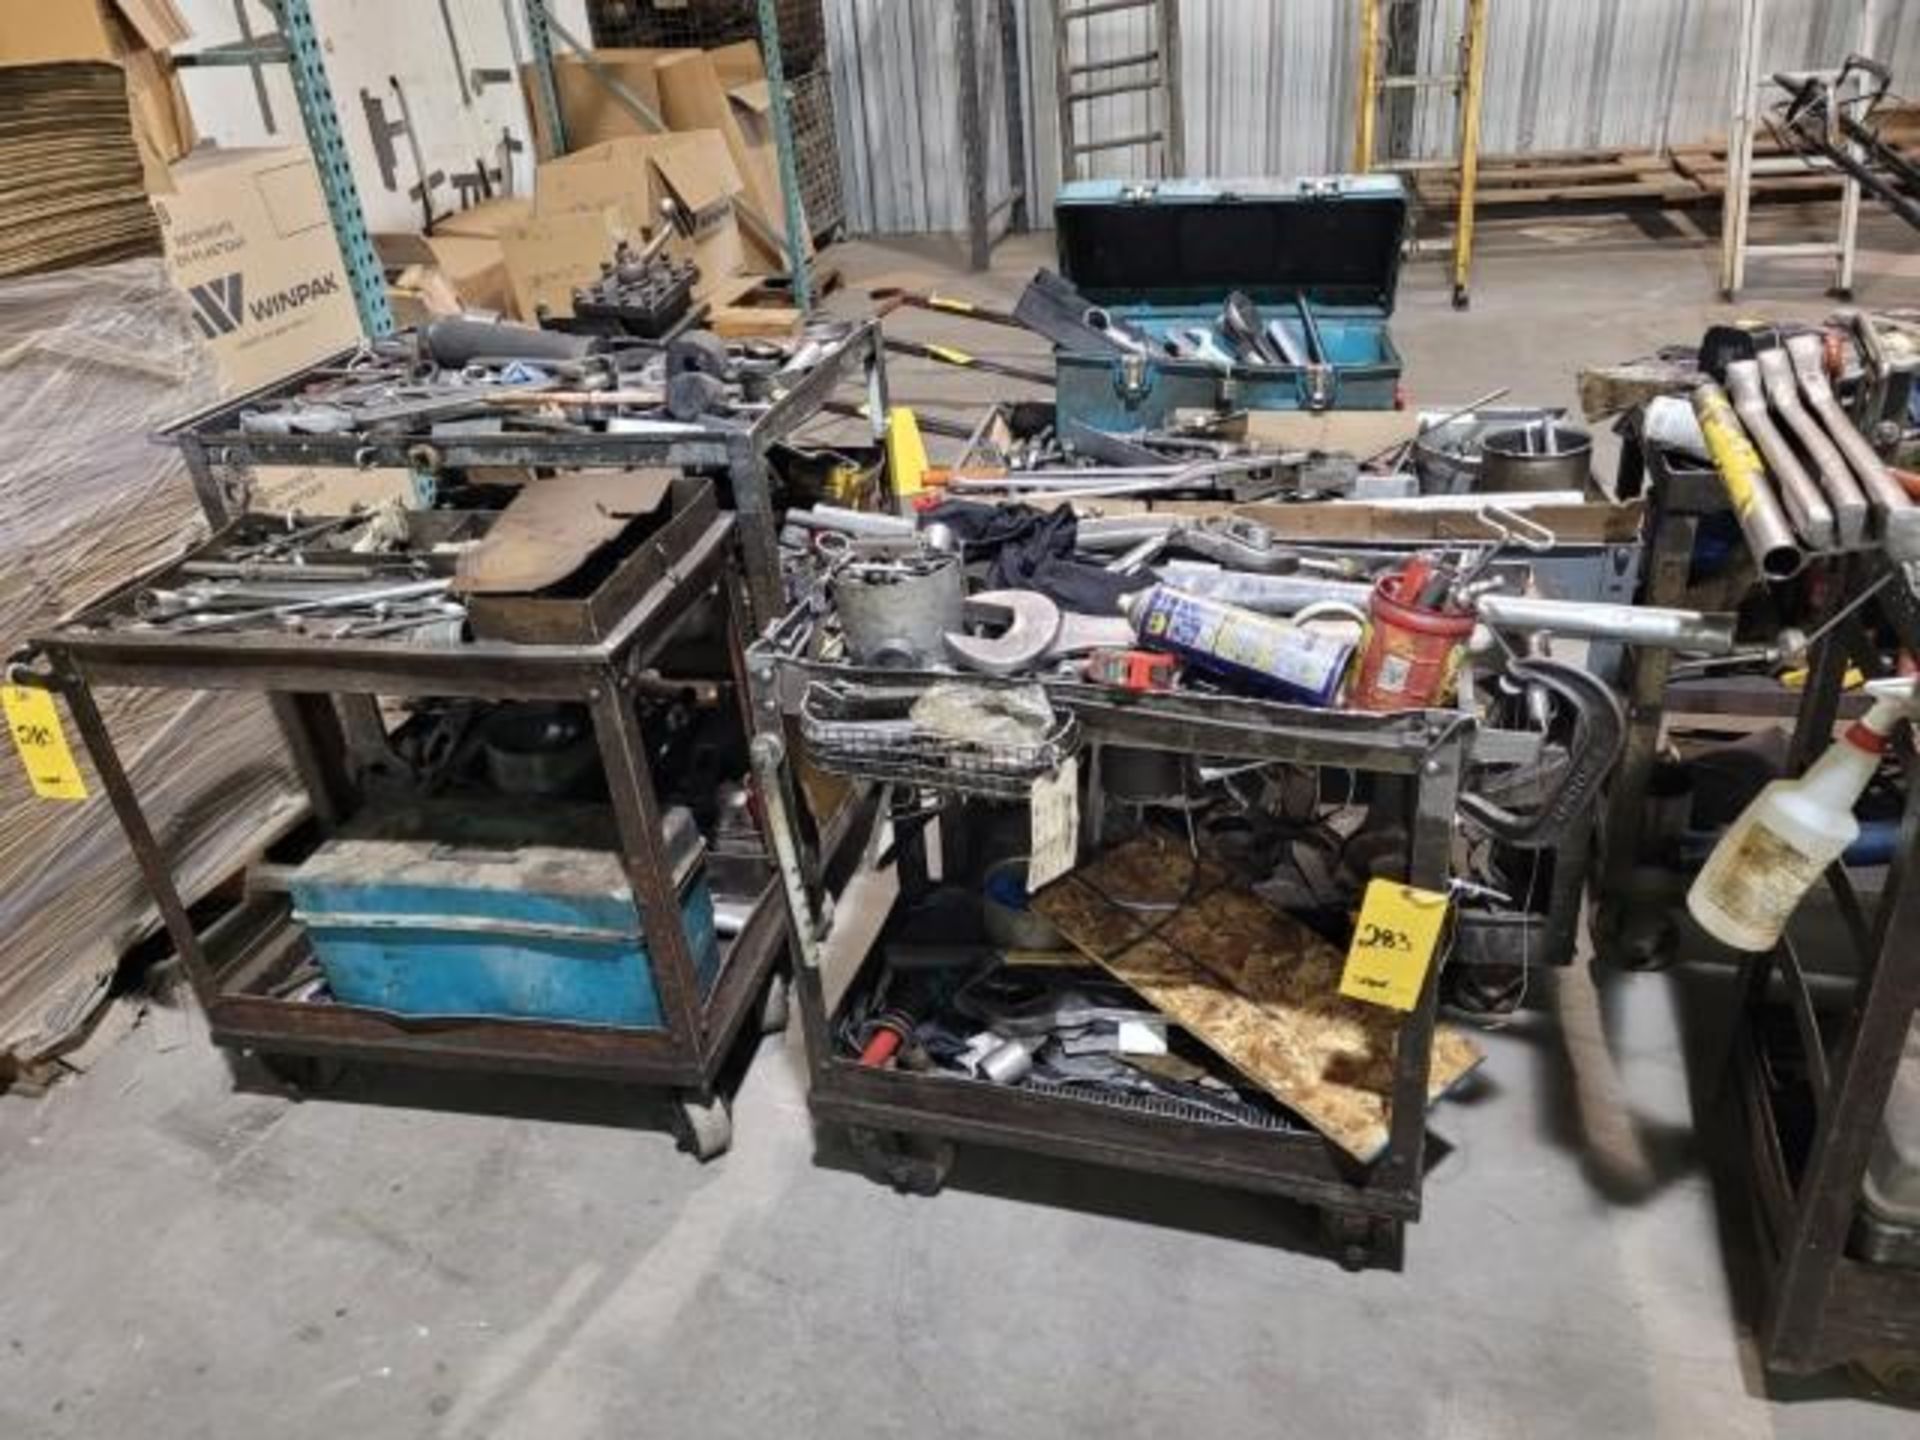 LOT: (6) Utility Carts w/ Hand Tools Consisting of: Sockets, Wrenches, Tool Boxes, Handles, Nuts, Bo - Image 4 of 5